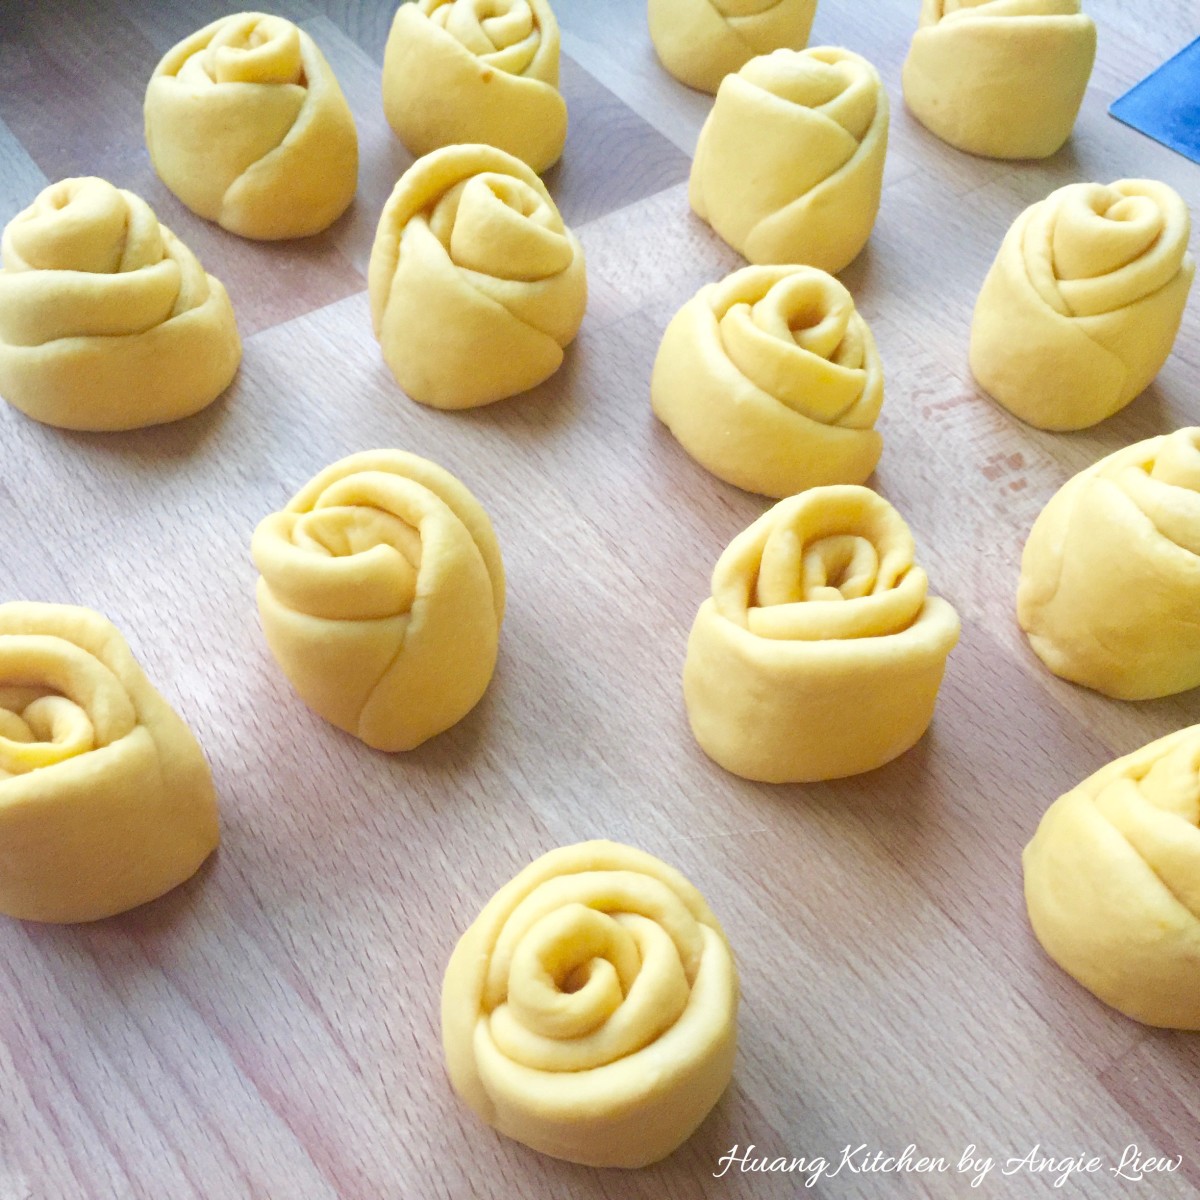 Steamed Pumpkin Flower Rolls - repeat with rest